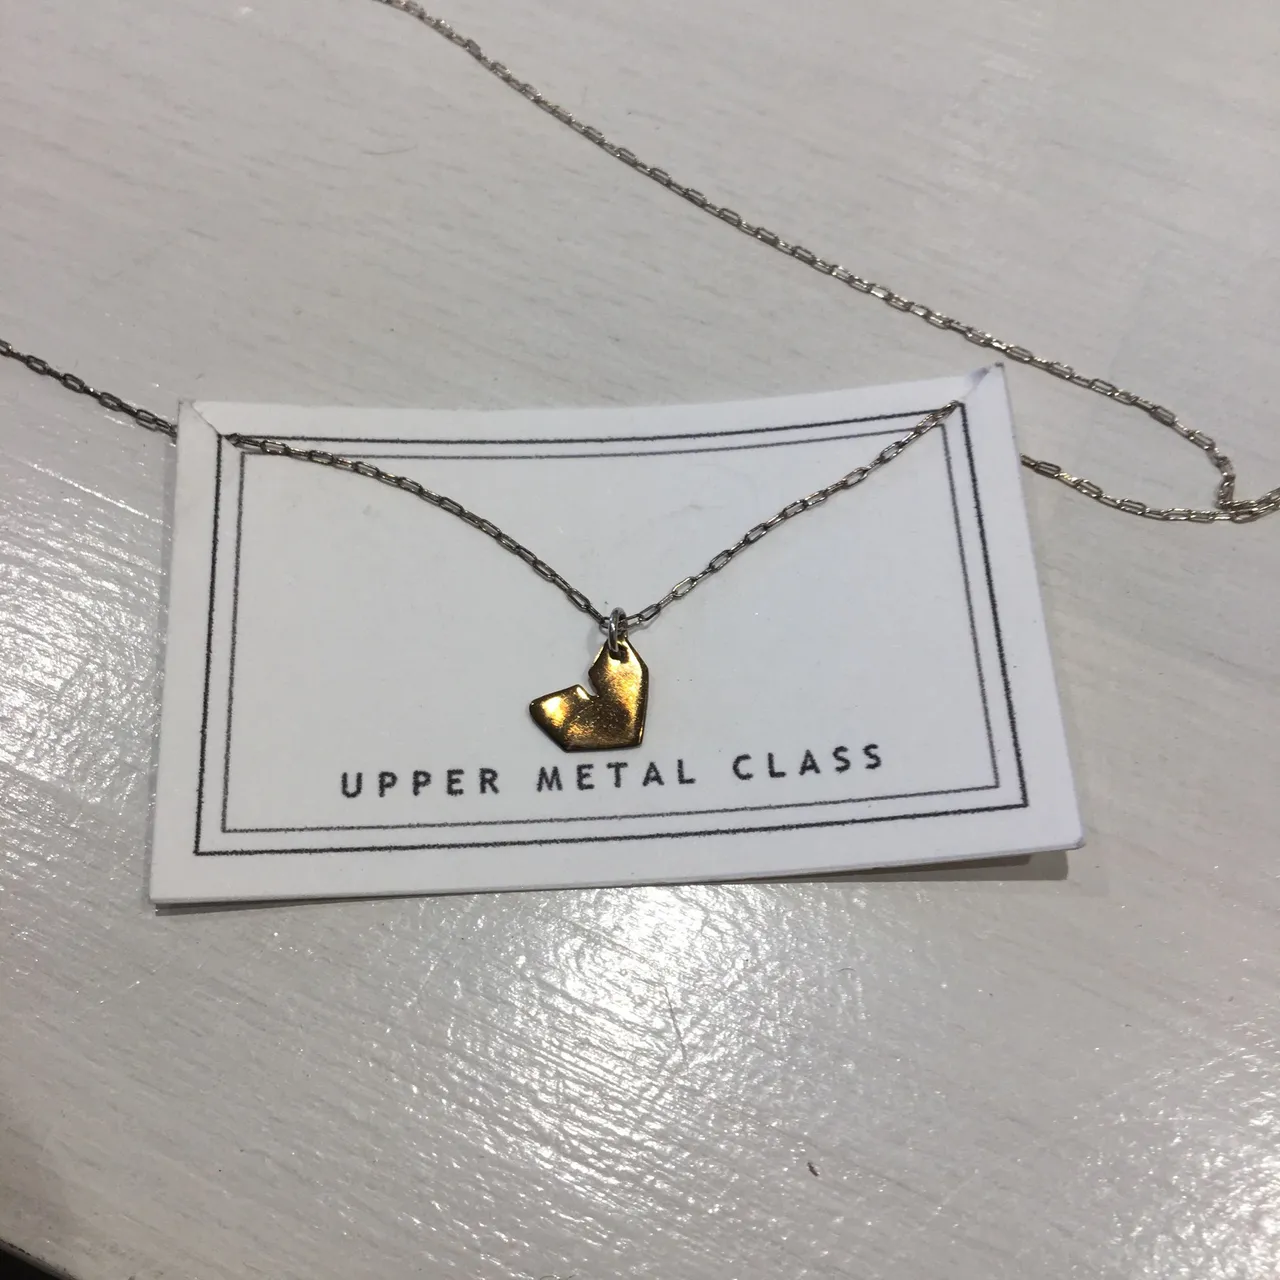 Upper Metal Class Necklace photo 1